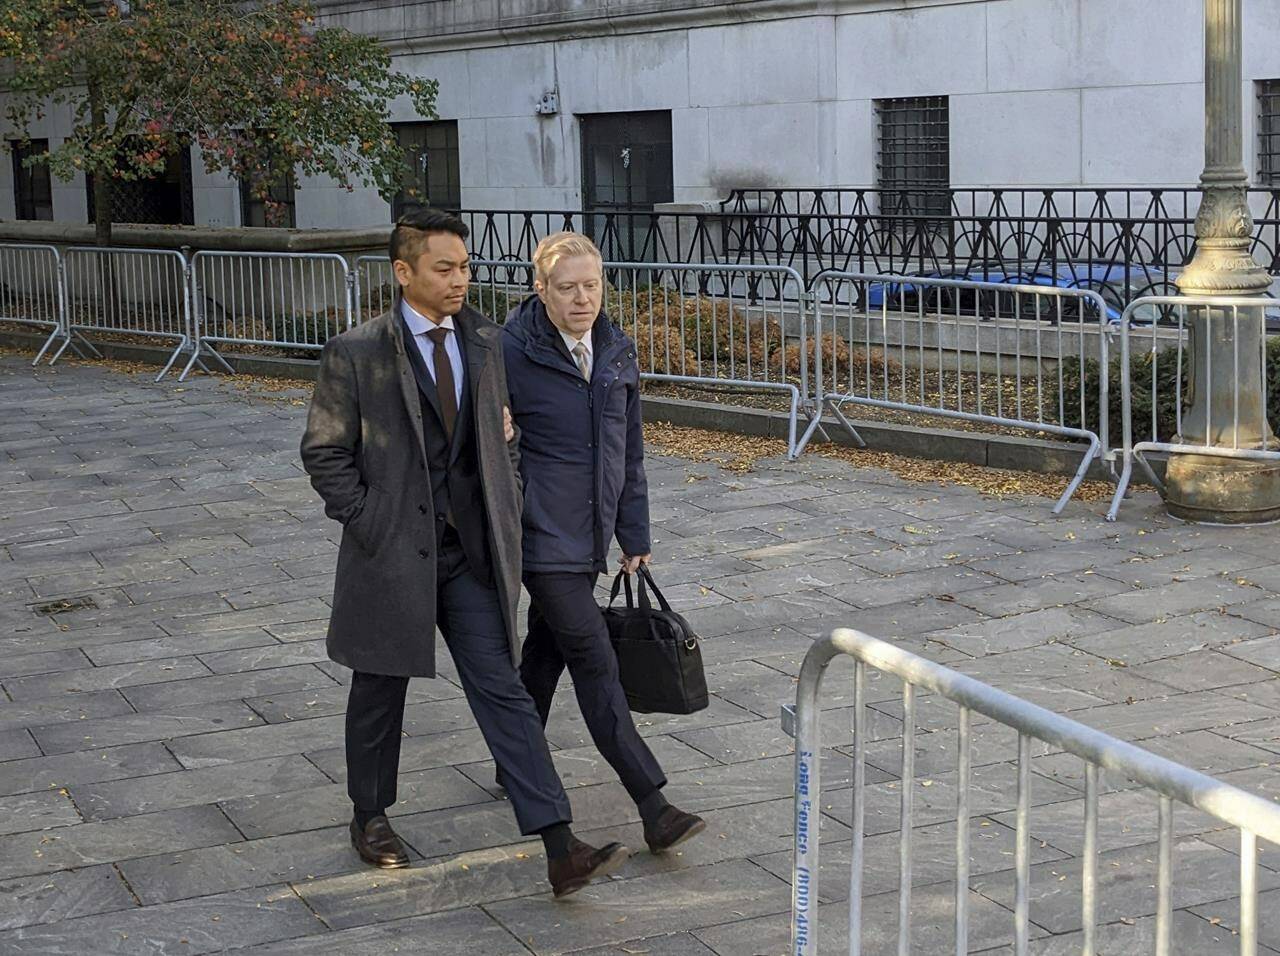 Actor Anthony Rapp, right, and Ken Ithiphol arrive at a federal courthouse in lower Manhattan in New York on Thursday, Oct. 20, 2022, for a civil case against actor Kevin Spacey. (AP Photo/Ted Shaffrey)